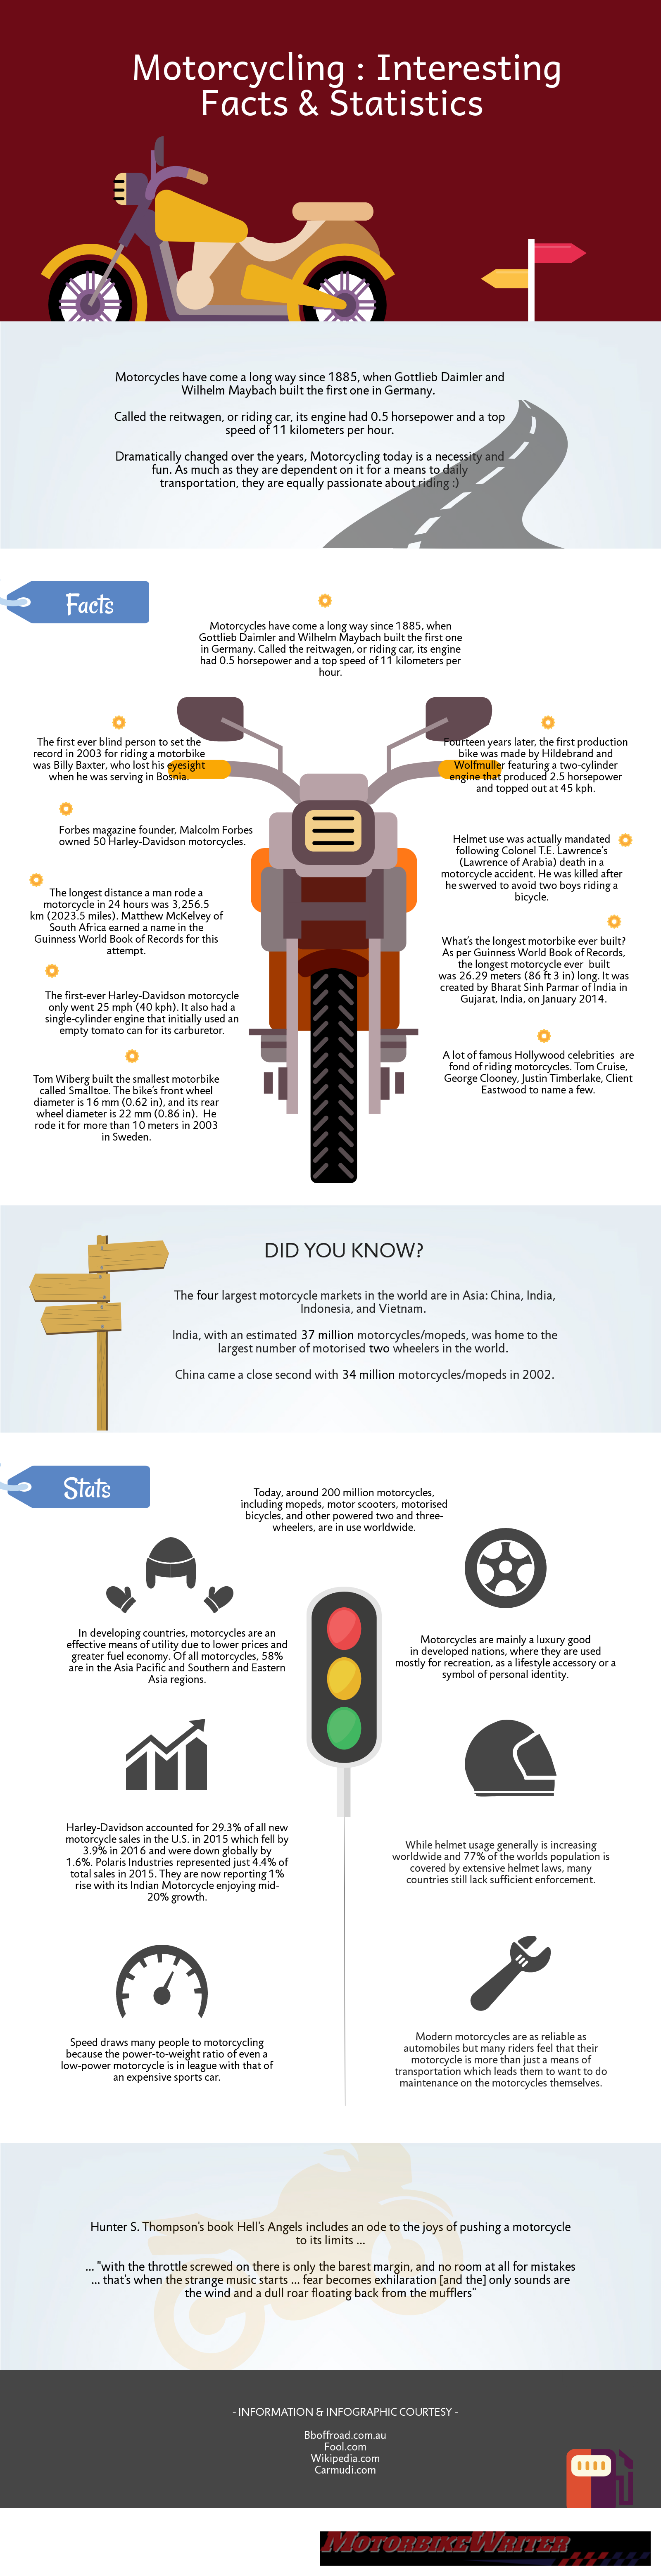 Interesting motorcycling facts and figures